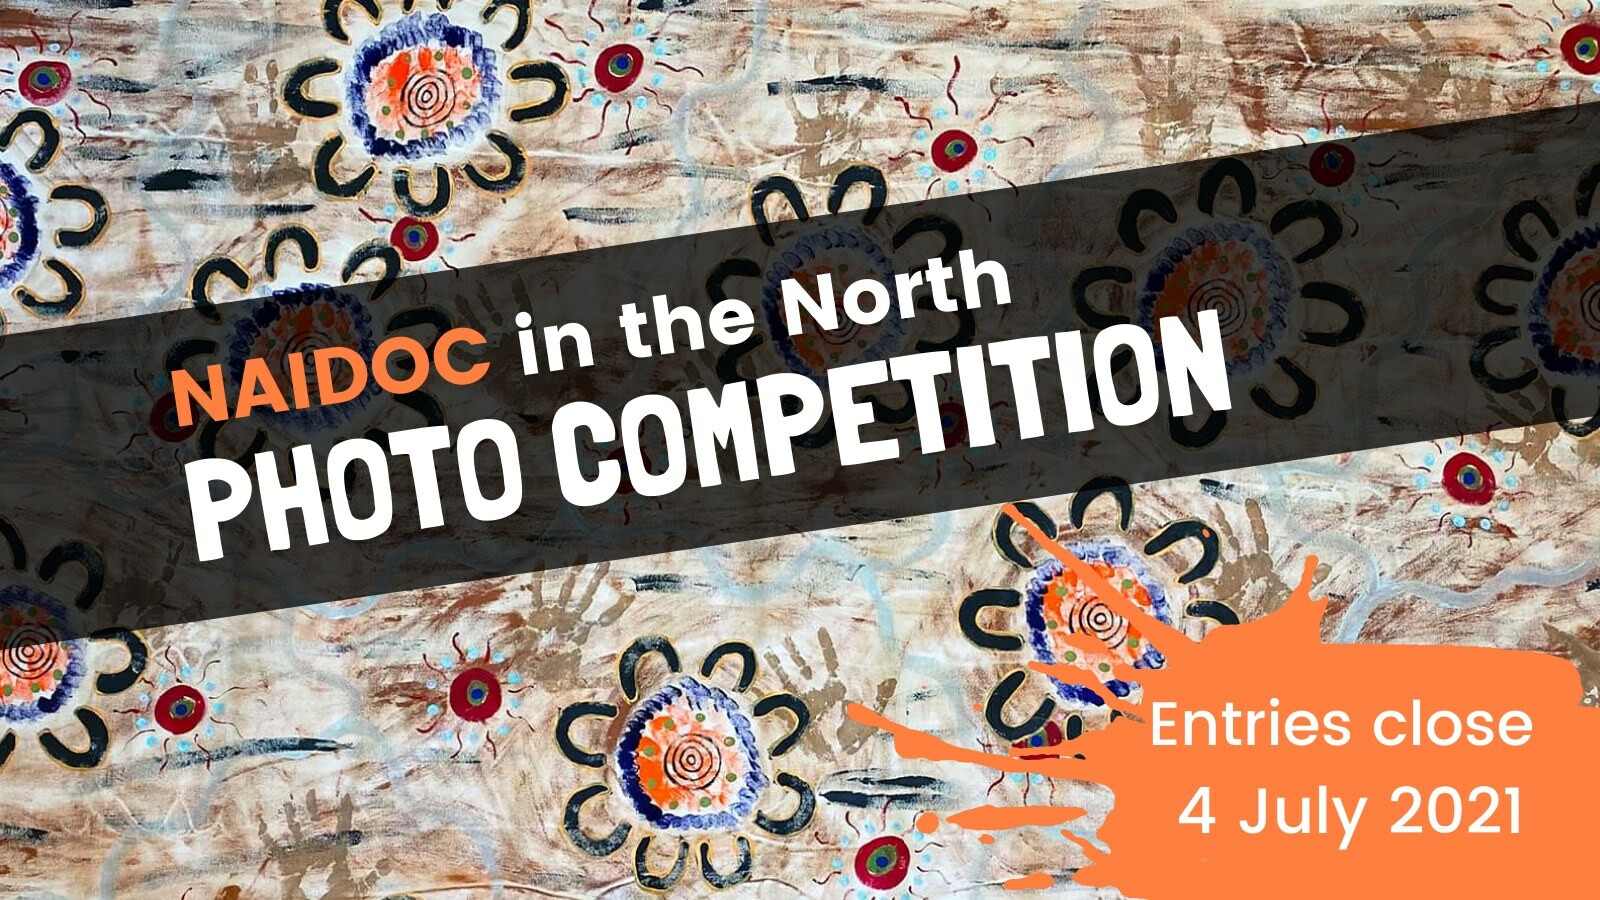 NAIDOC in the North photo competition